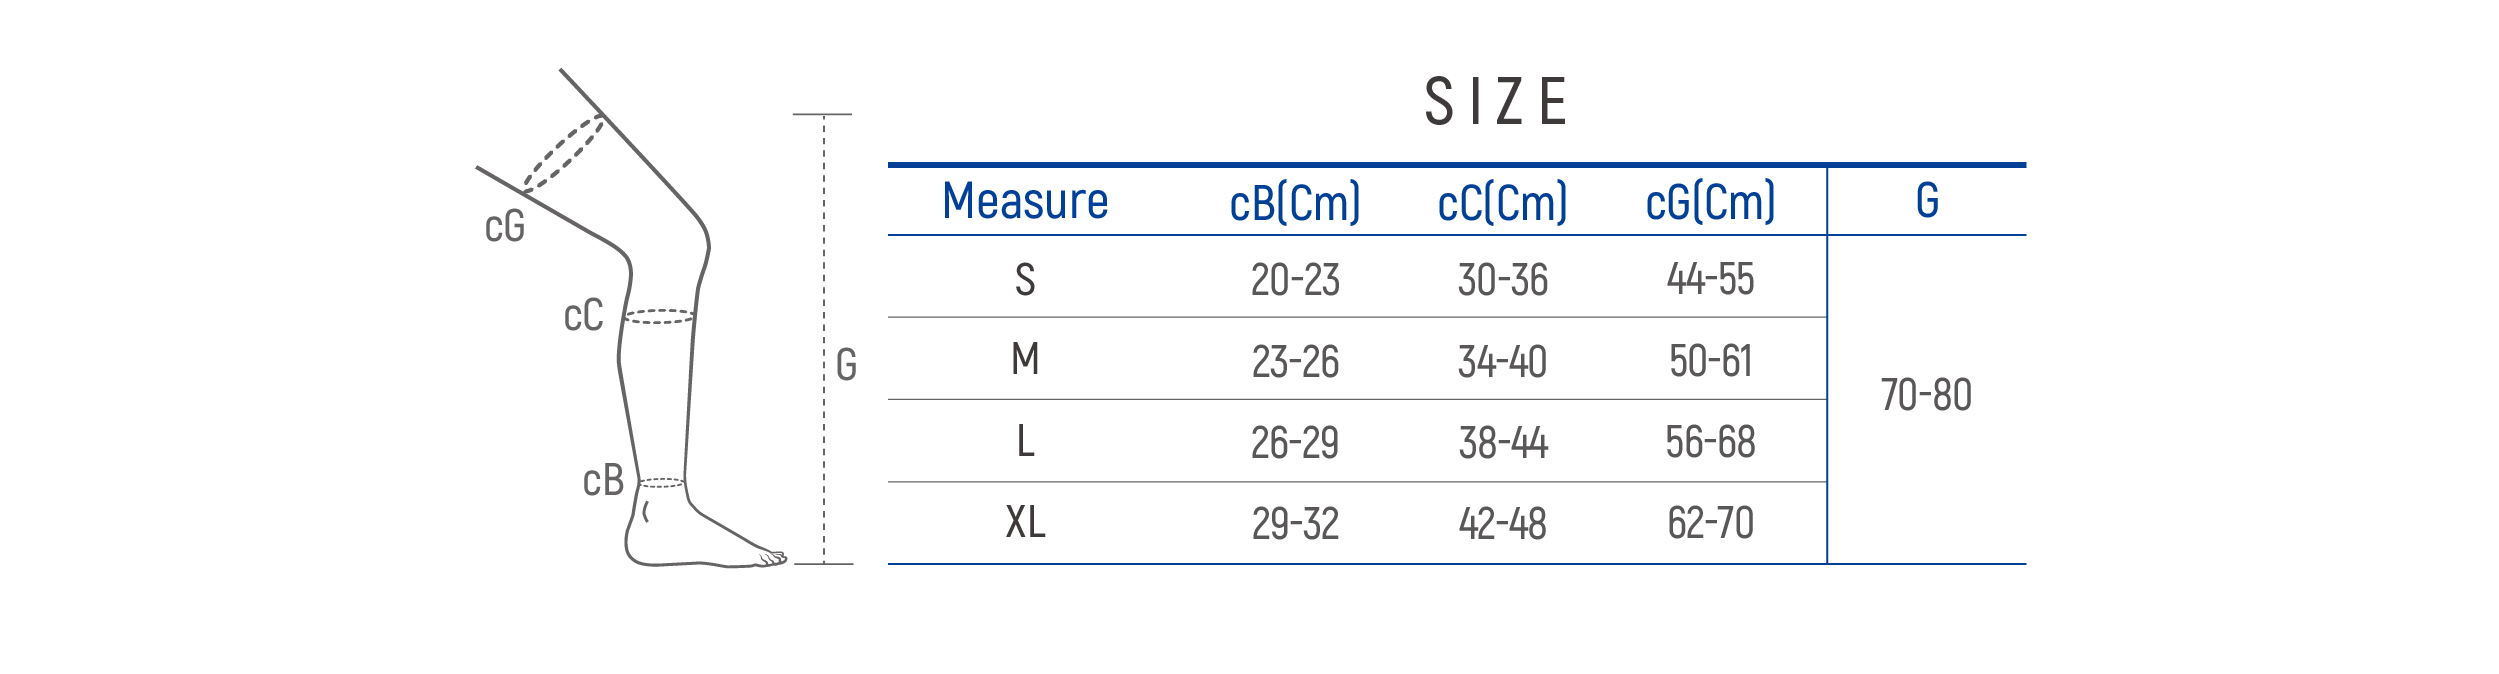 DR-A061 Size table image